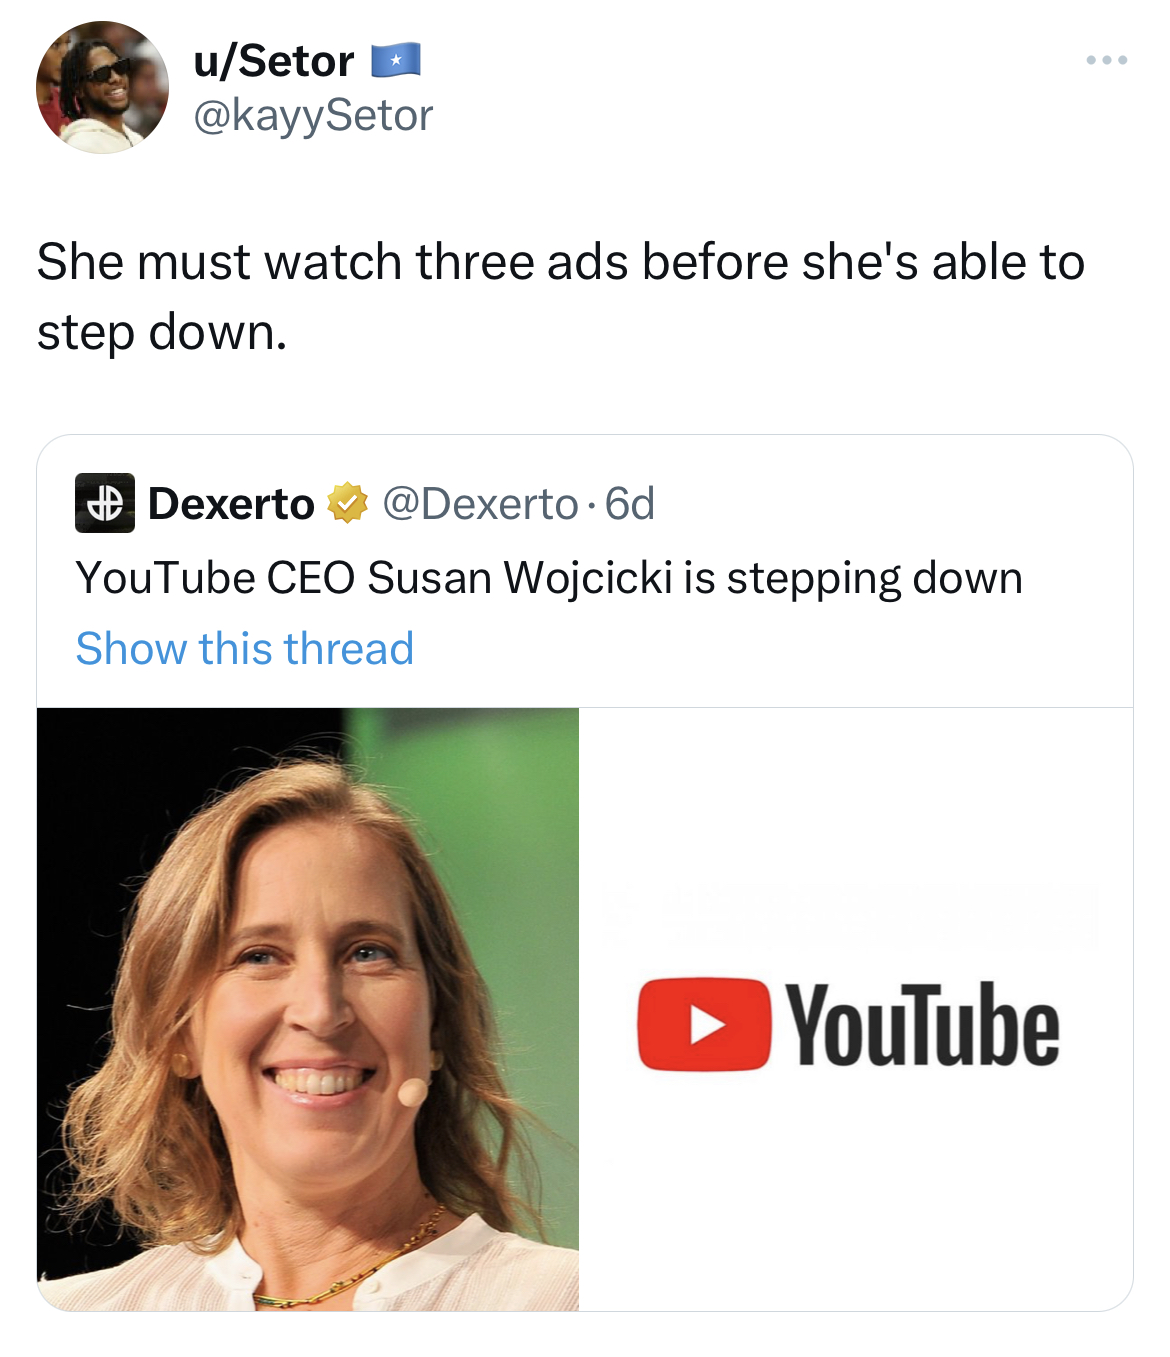 Tweets dunking on celebs - youtube play - uSetor She must watch three ads before she's able to step down. Dexerto YouTube Ceo Susan Wojcicki is stepping down Show this thread YouTube